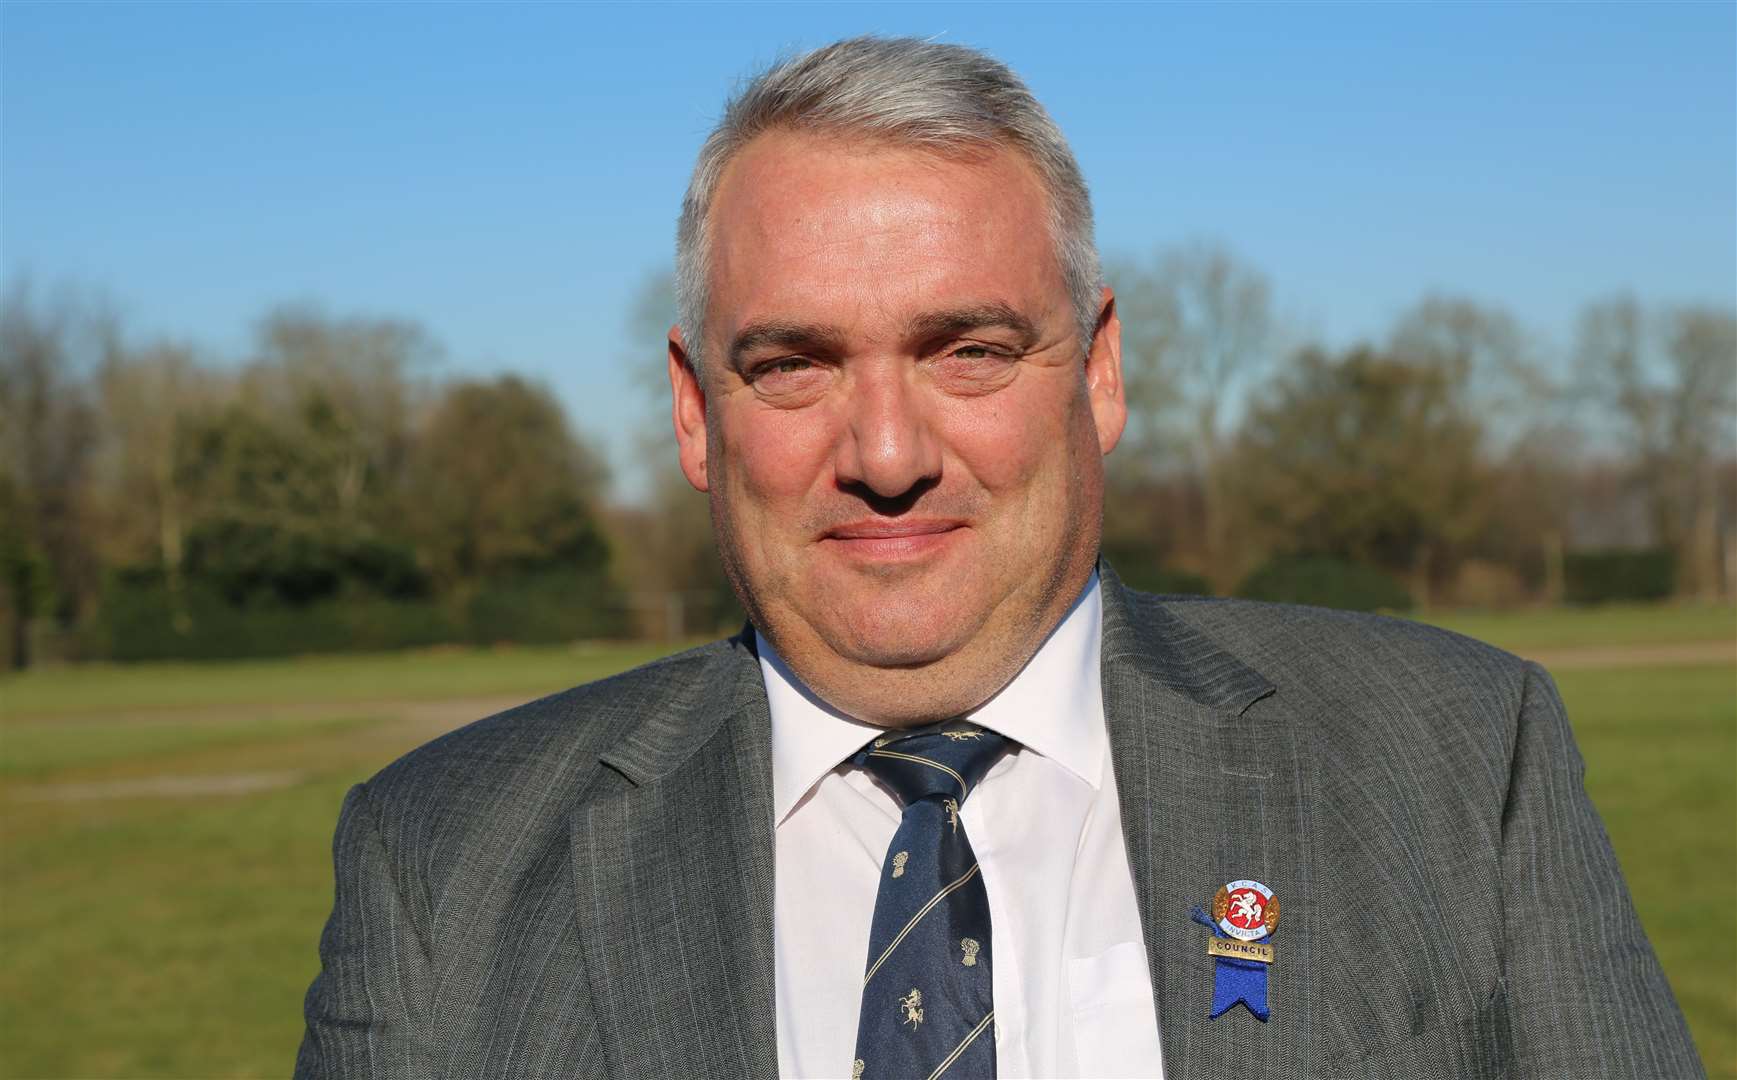 James Forknall, the new chairman of the Kent County Agricultural Society